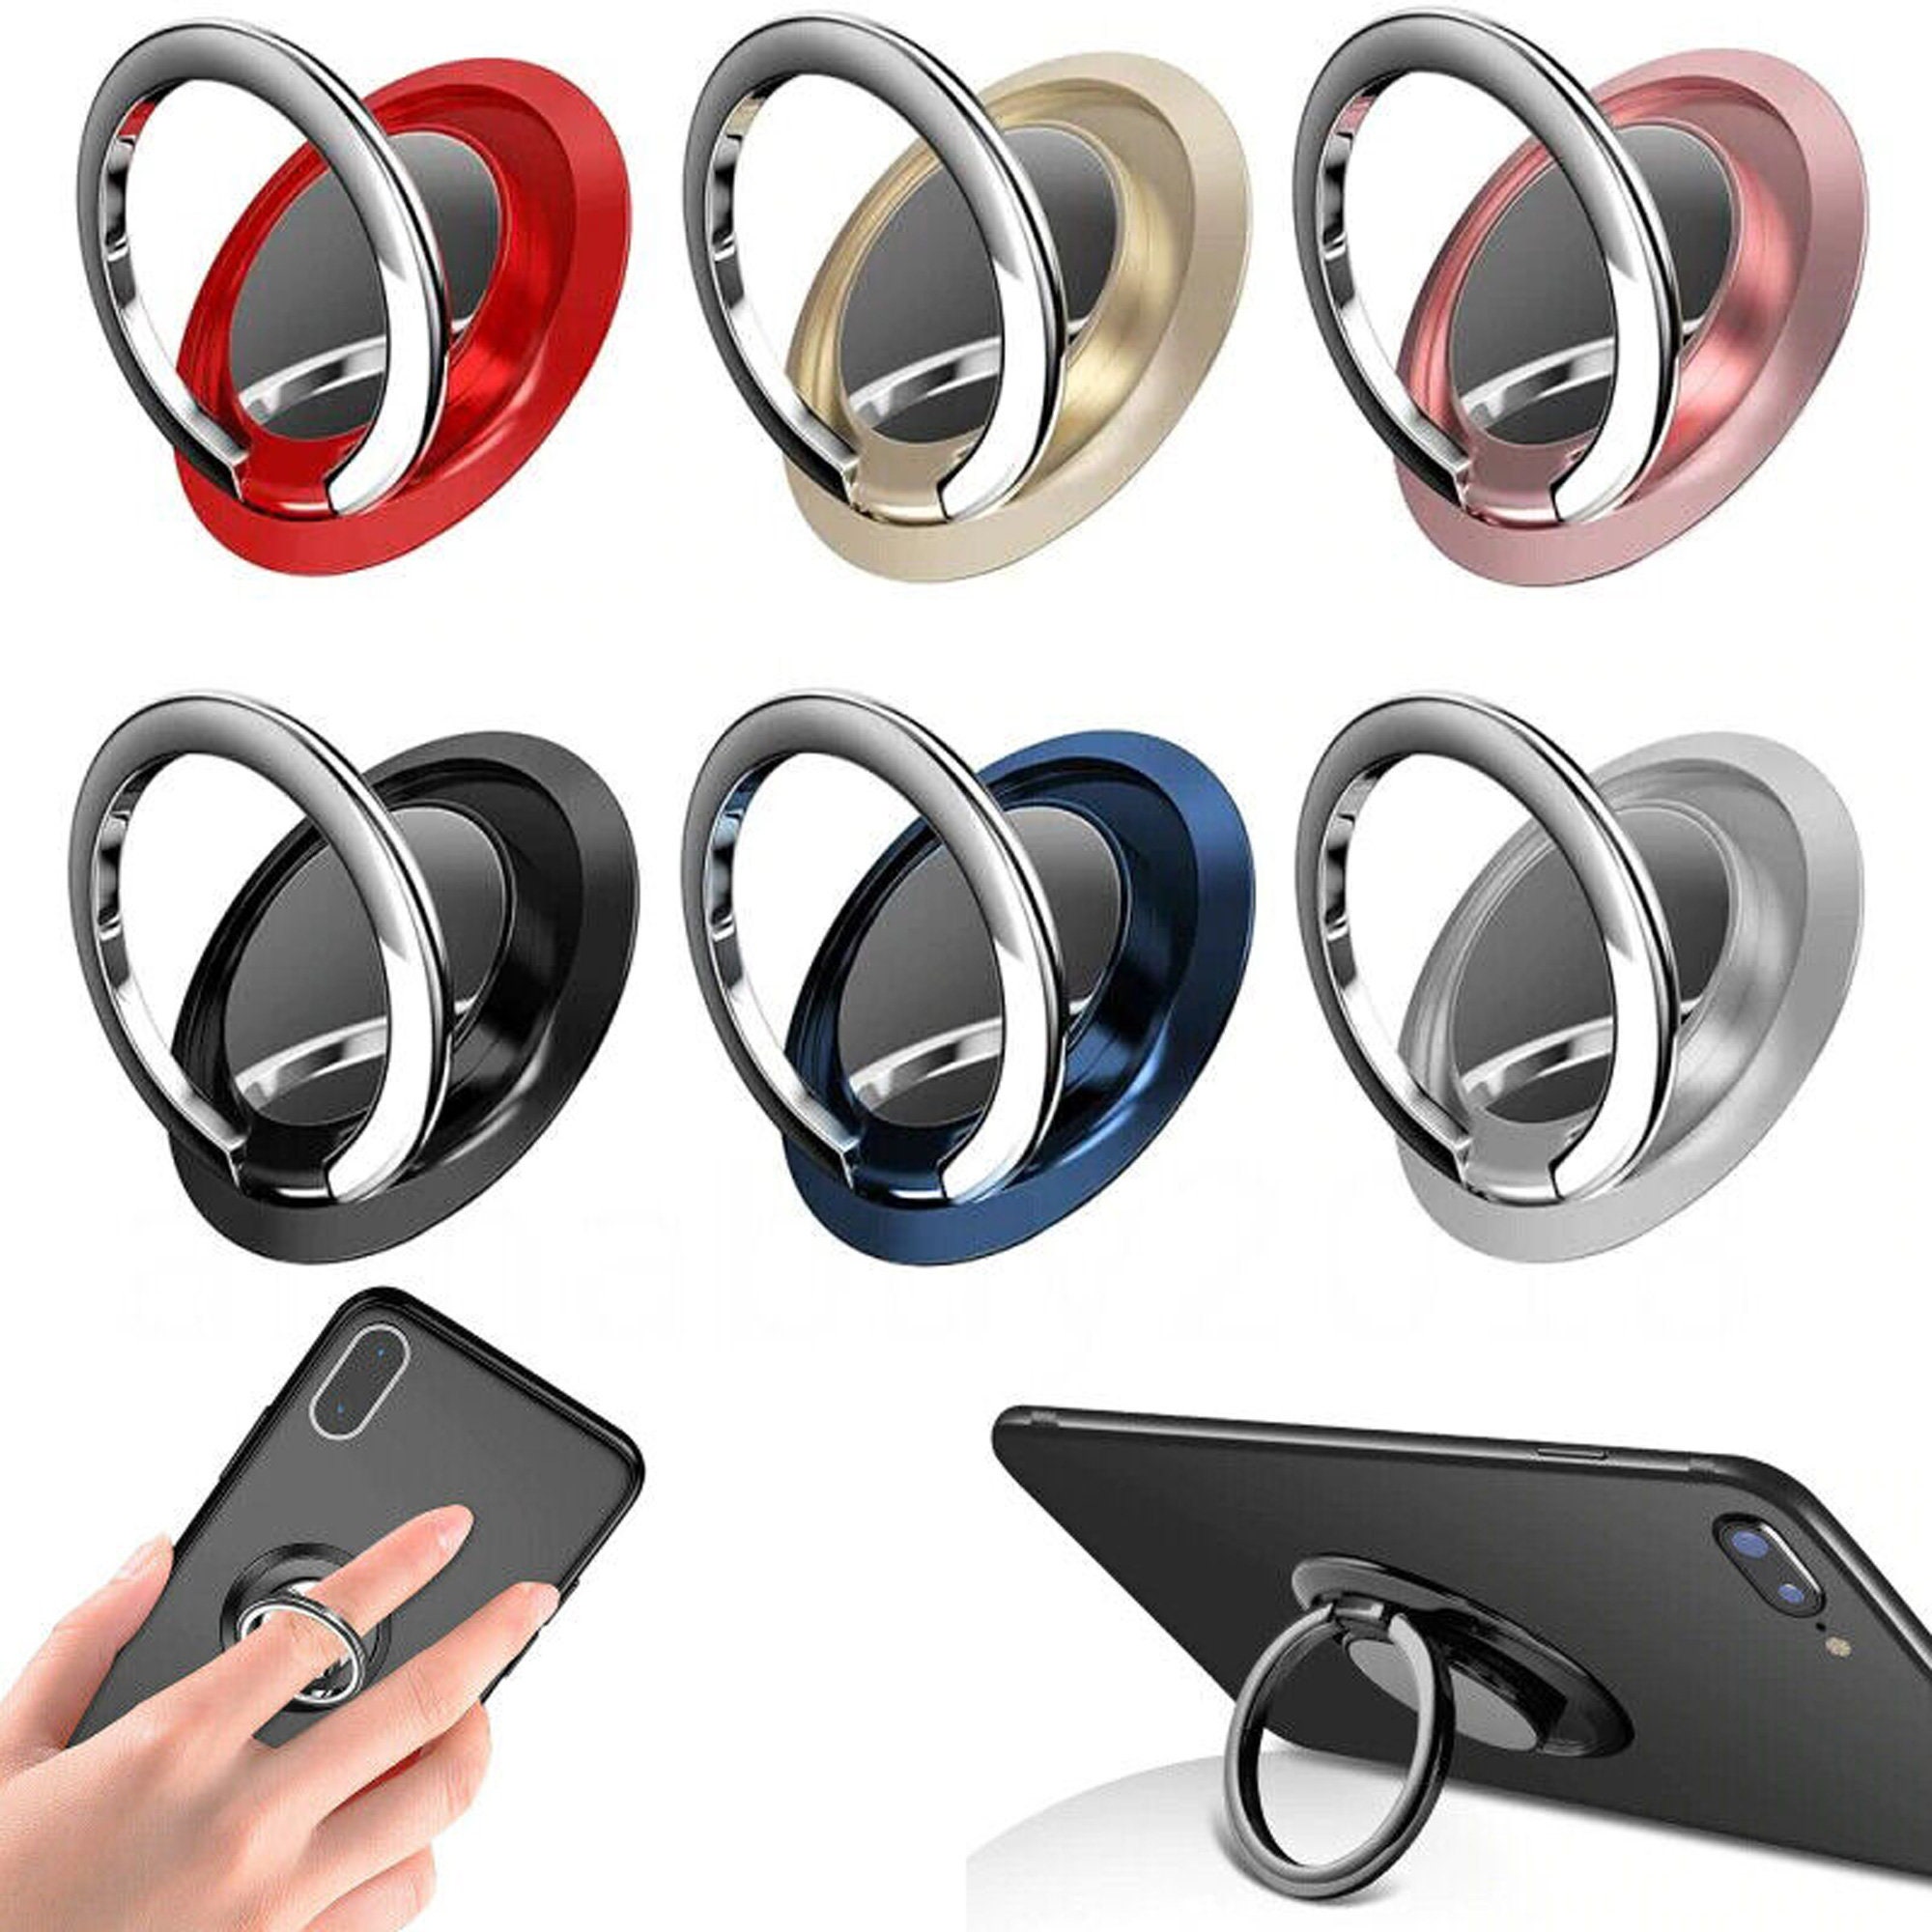 Self-adhesive Finger Grip Strap Phone CellPhone Holder for  iPhone/iPad/Tablets